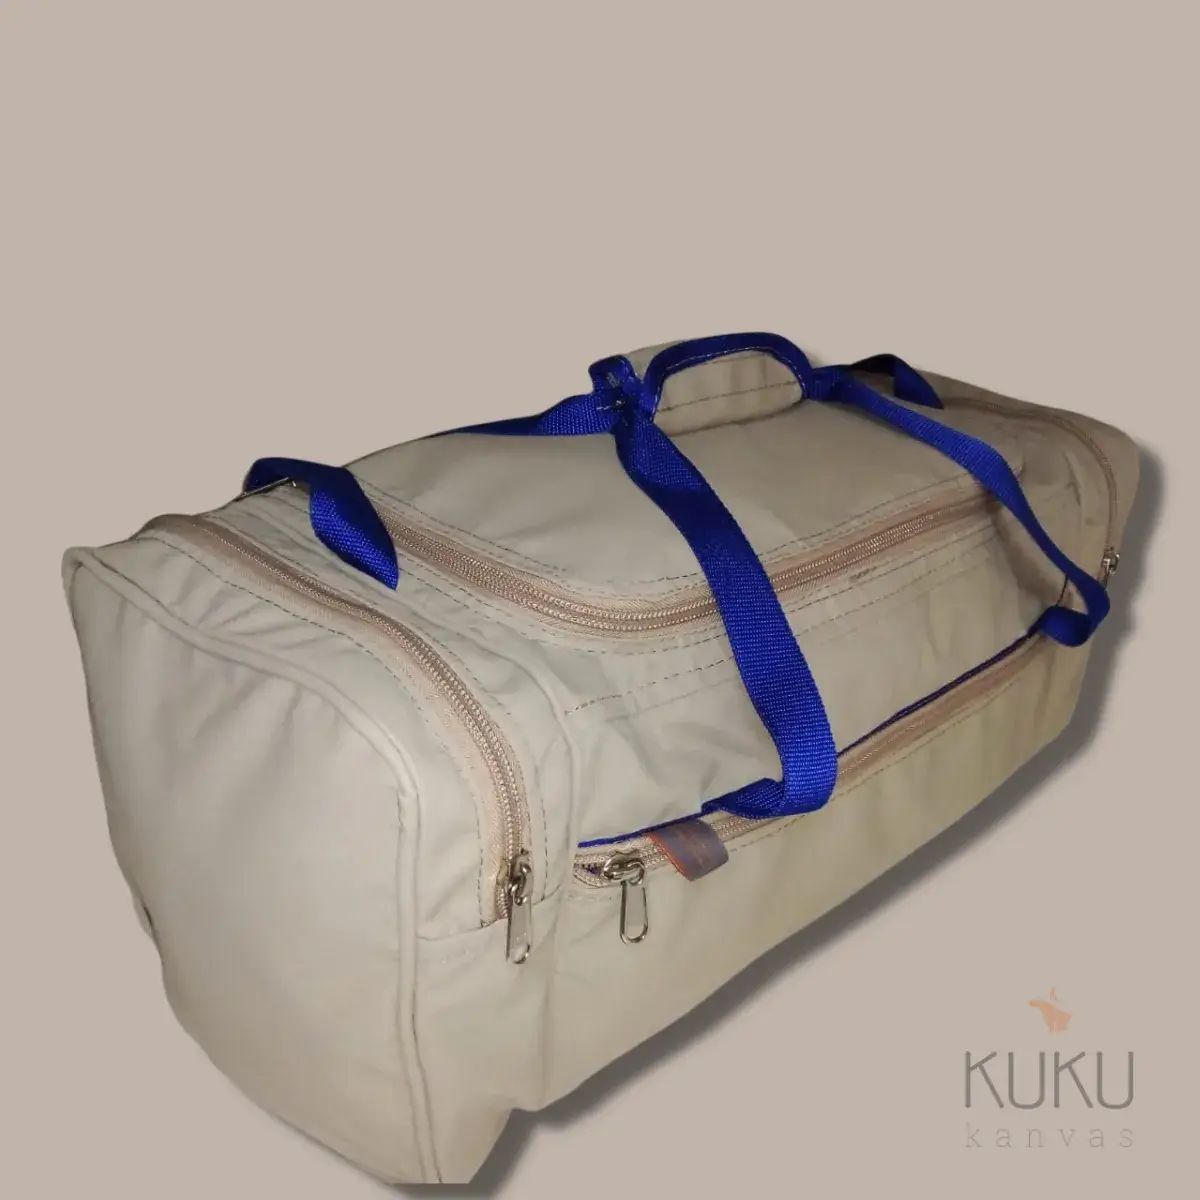 A white duffel bag with blue handles from kuku canvas